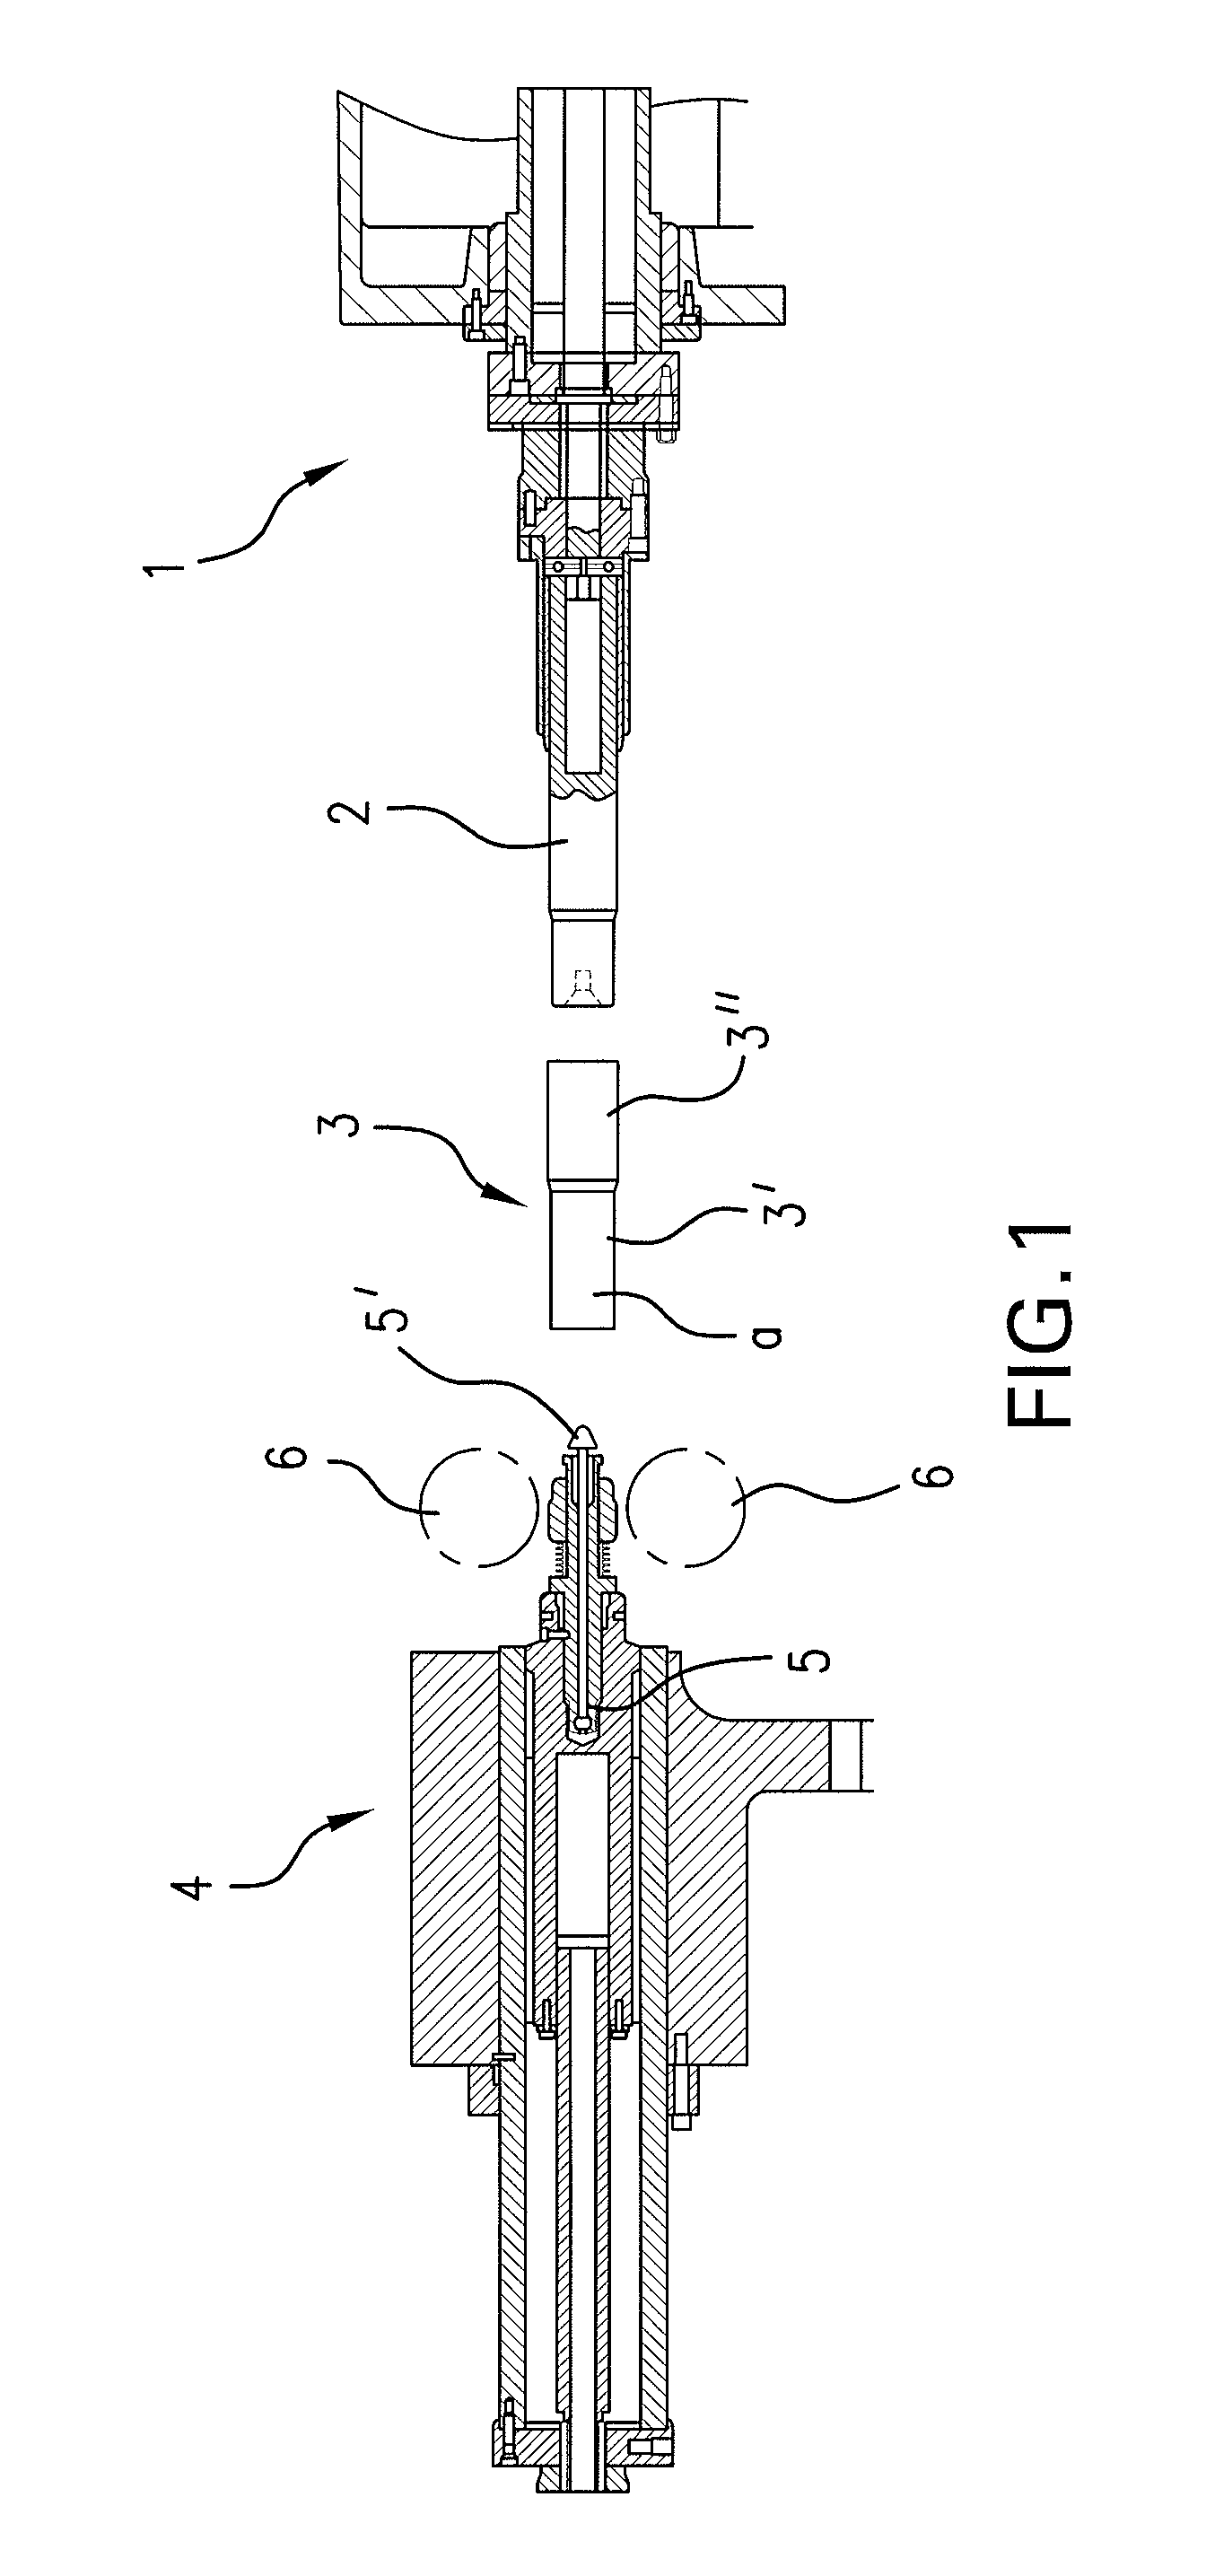 Method and device for making at least partly profiled tubes